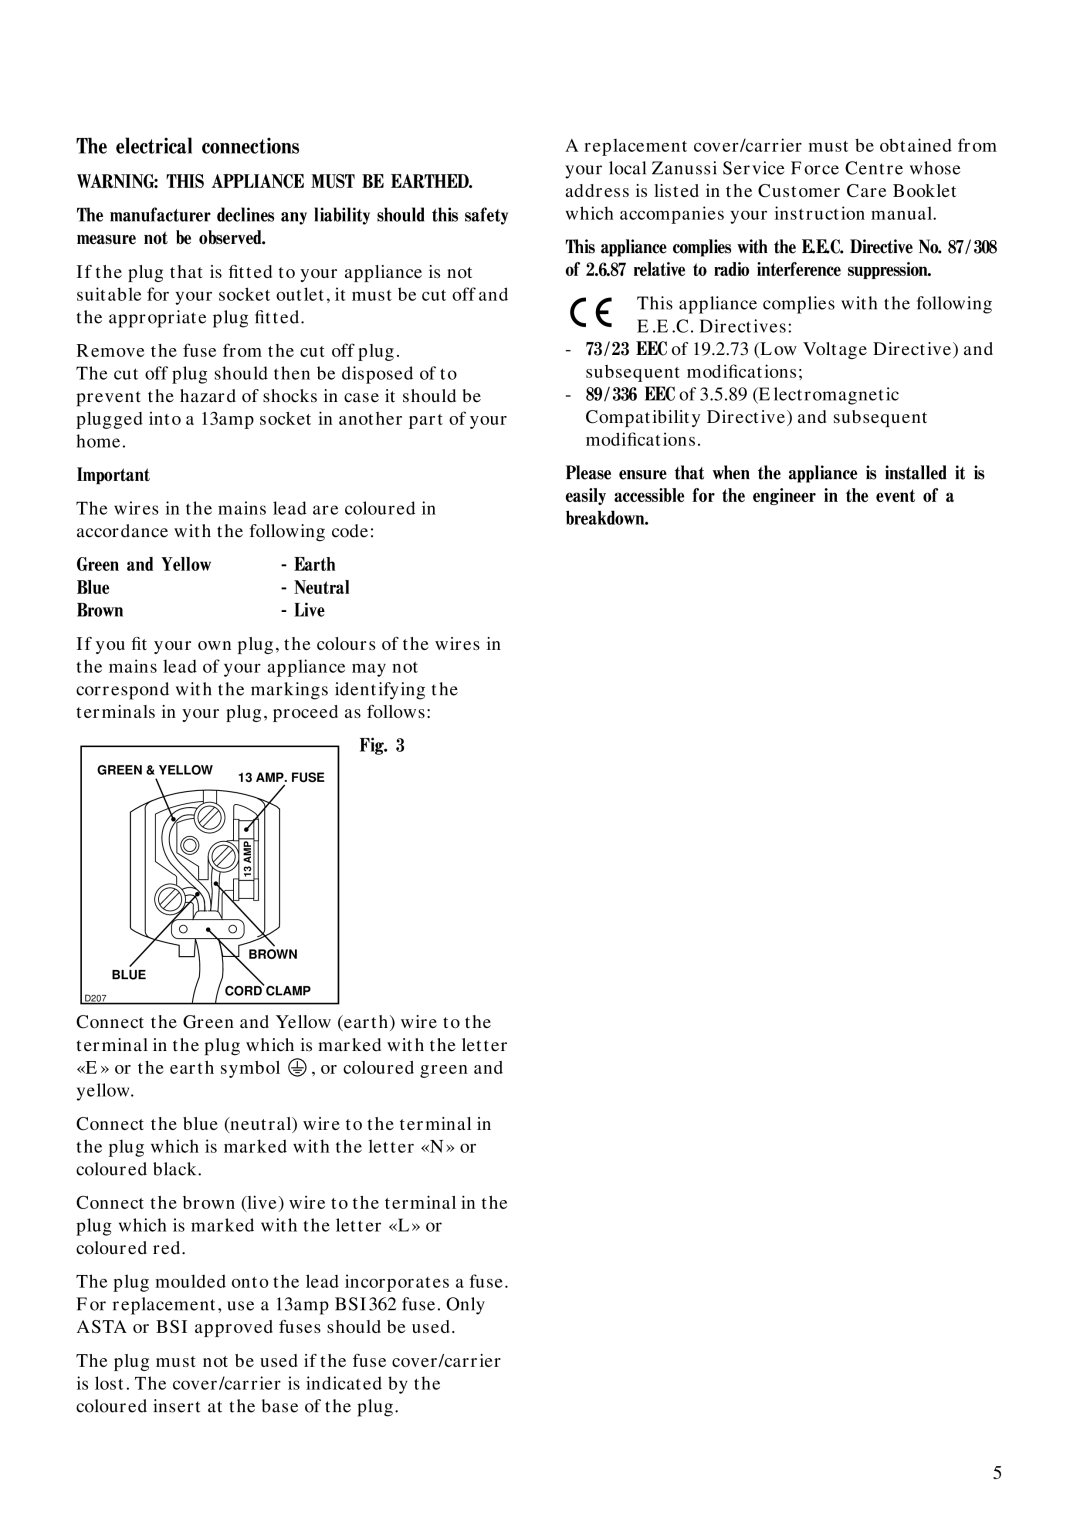 Zanussi ZFC 50/17 AL manual The electrical connections 